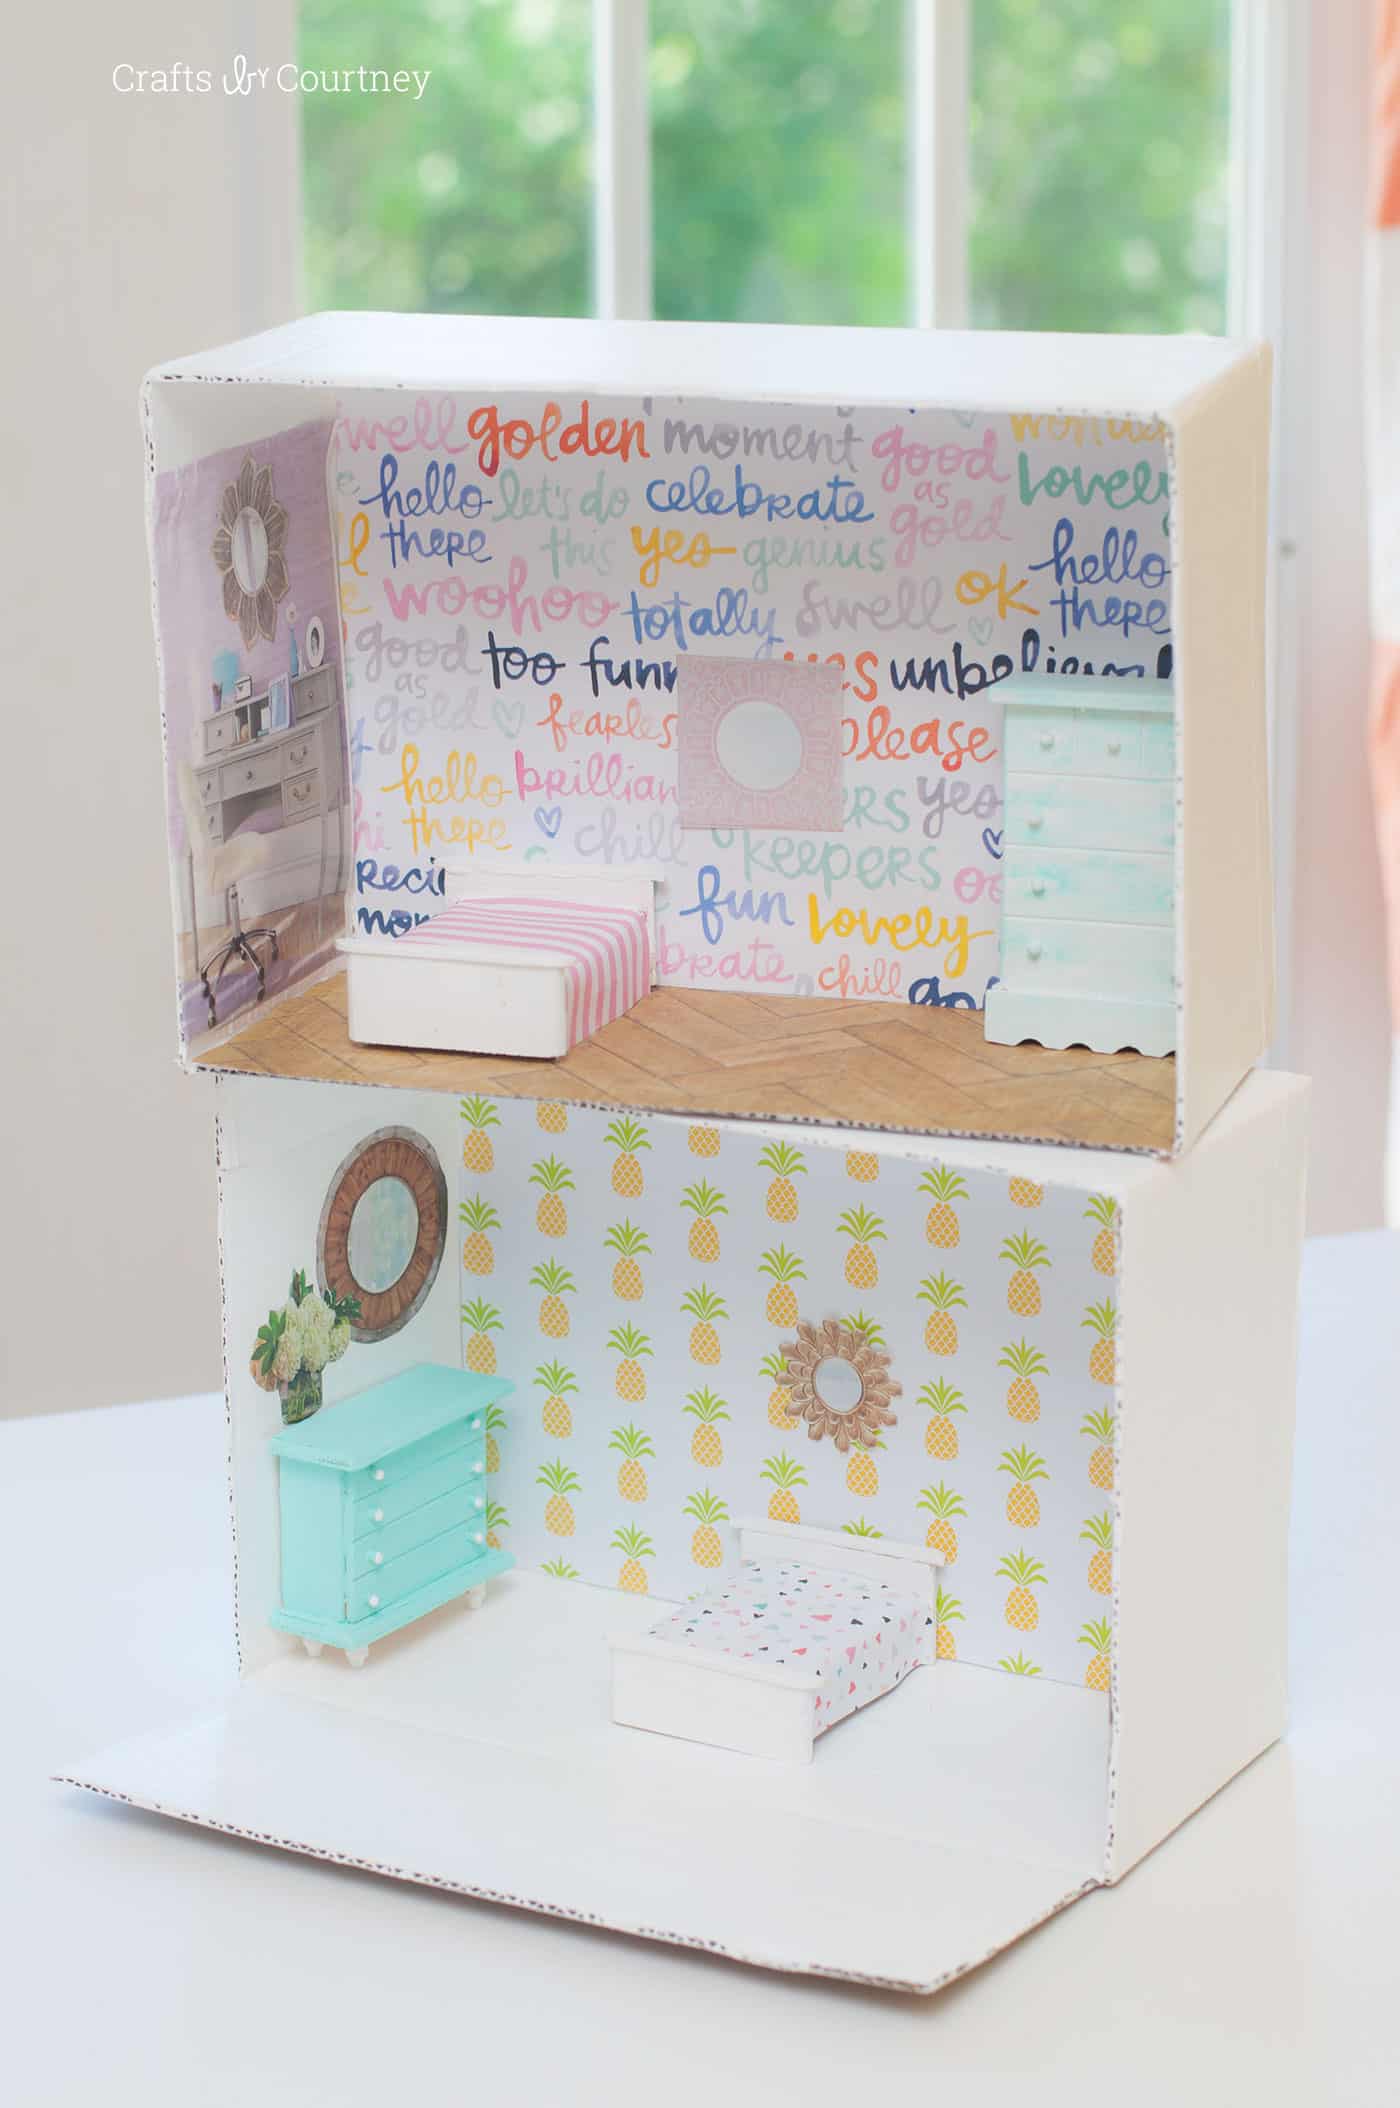 How to Make a Dollhouse Out of Cardboard